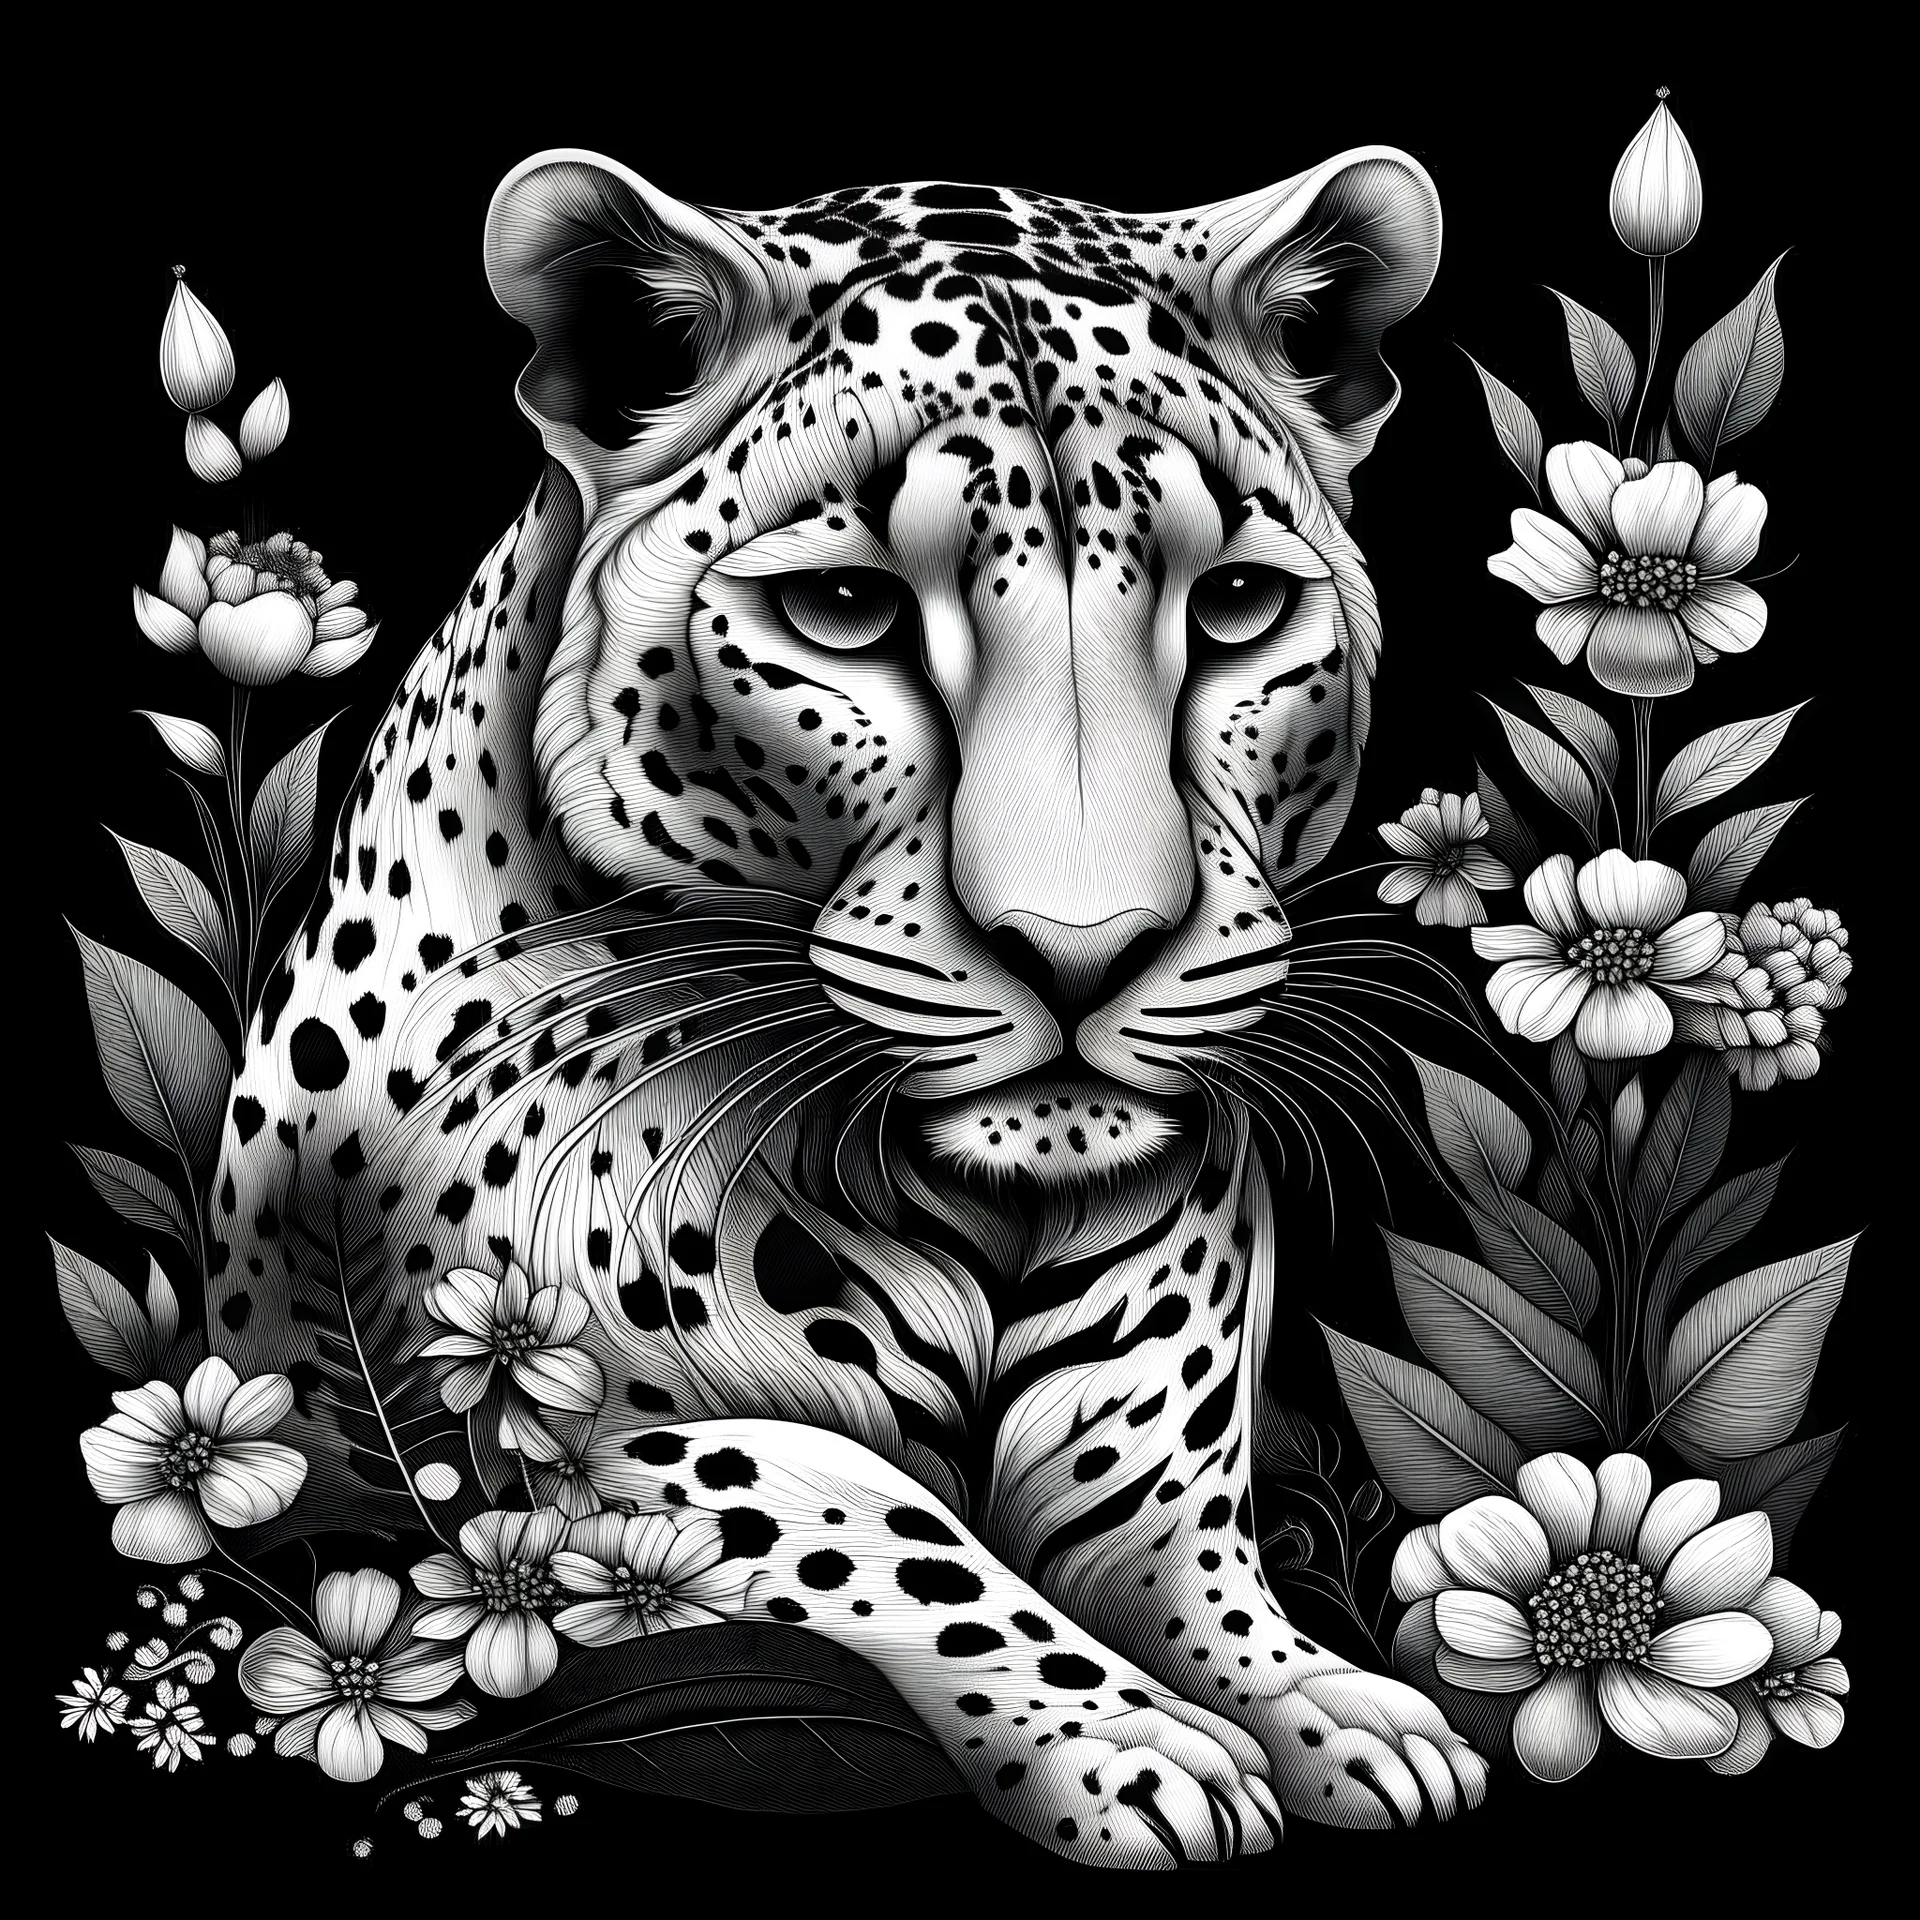 colorless cheetah between seeds and big flowers black background .black and white colors. for a coloring.